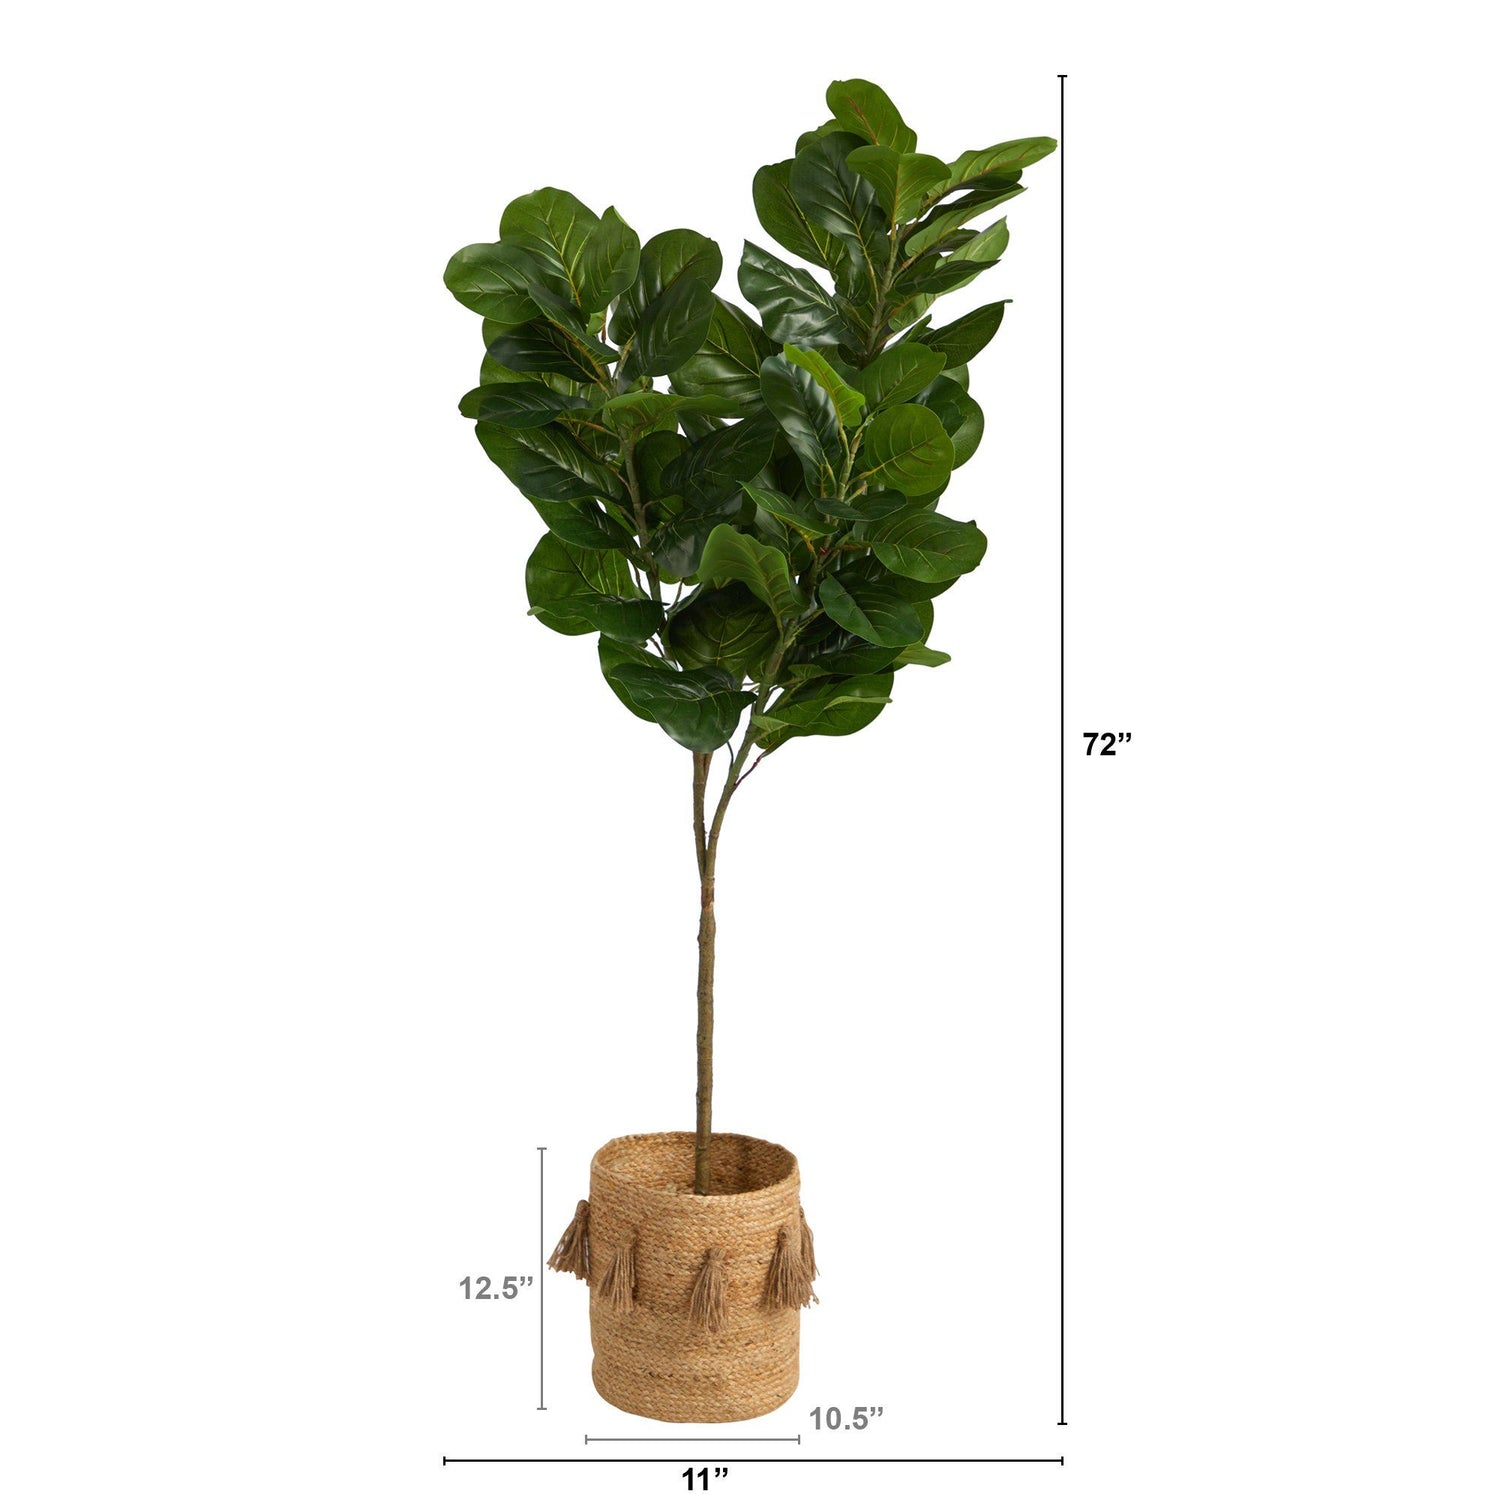 6’ Fiddle Leaf Fig Artificial Tree in Handmade Natural Jute Planter with Tassels